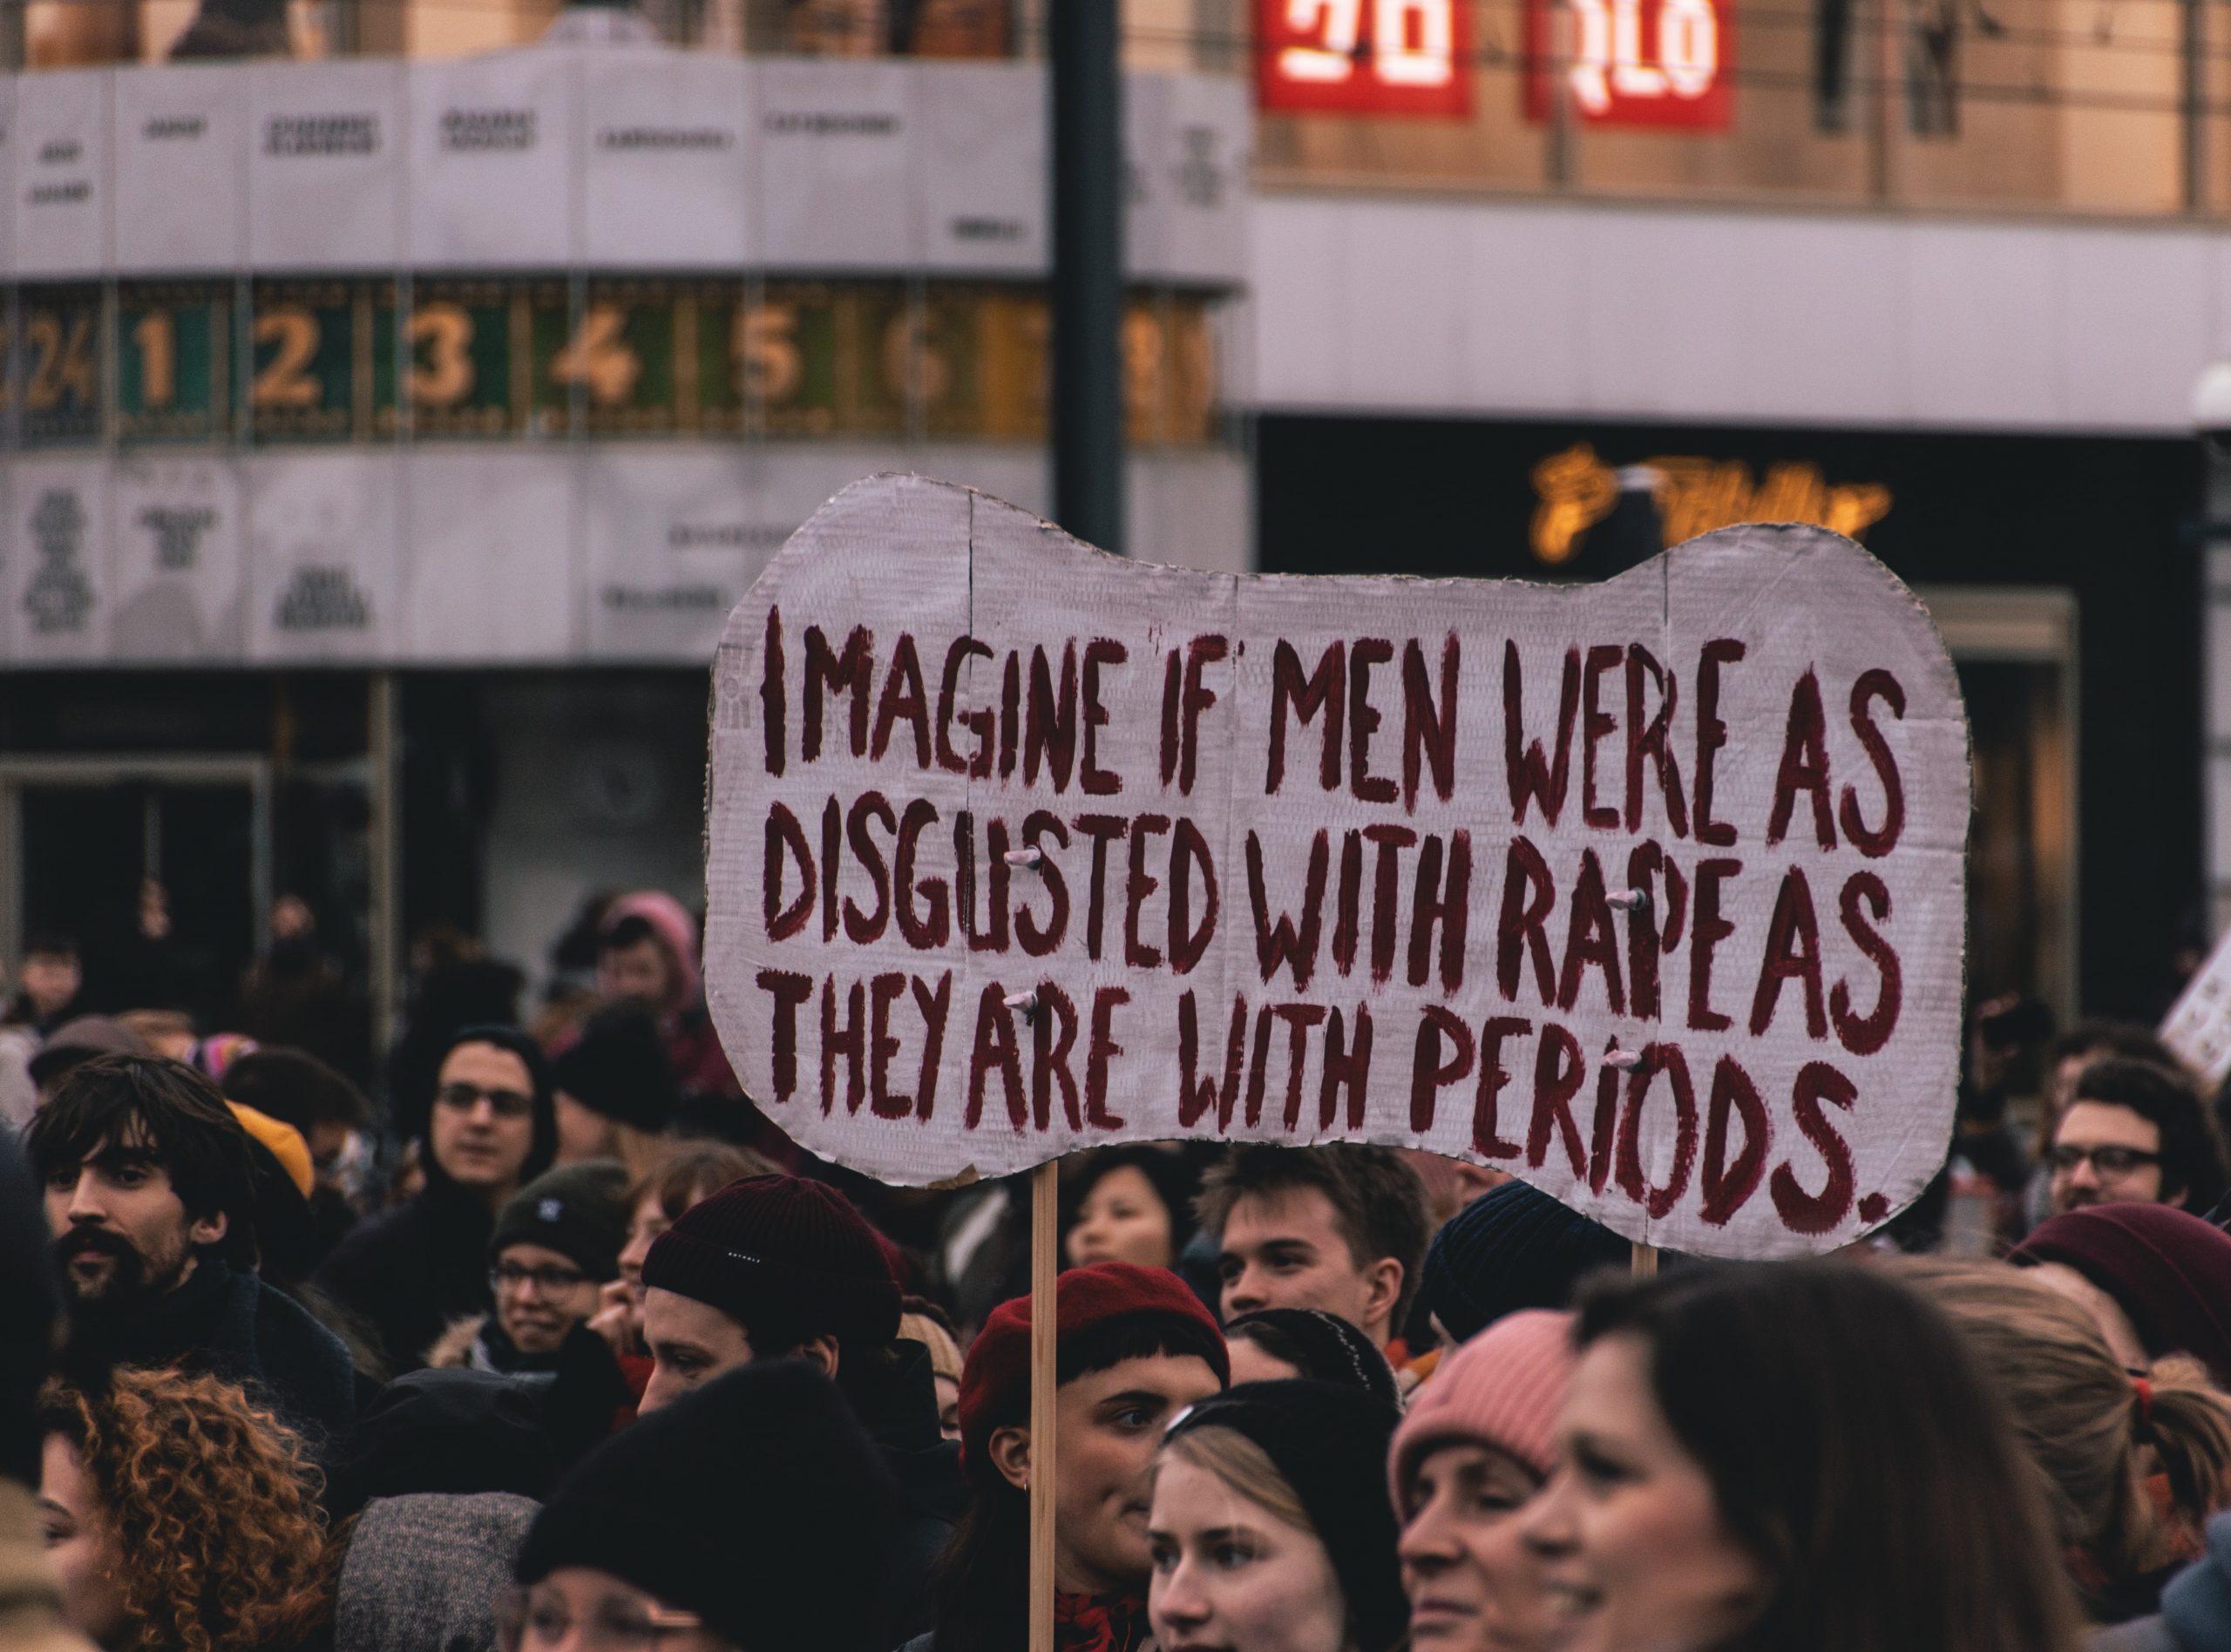 A sign in red lettering reads "imagine if men were as disgusted with rape as they are about periods"